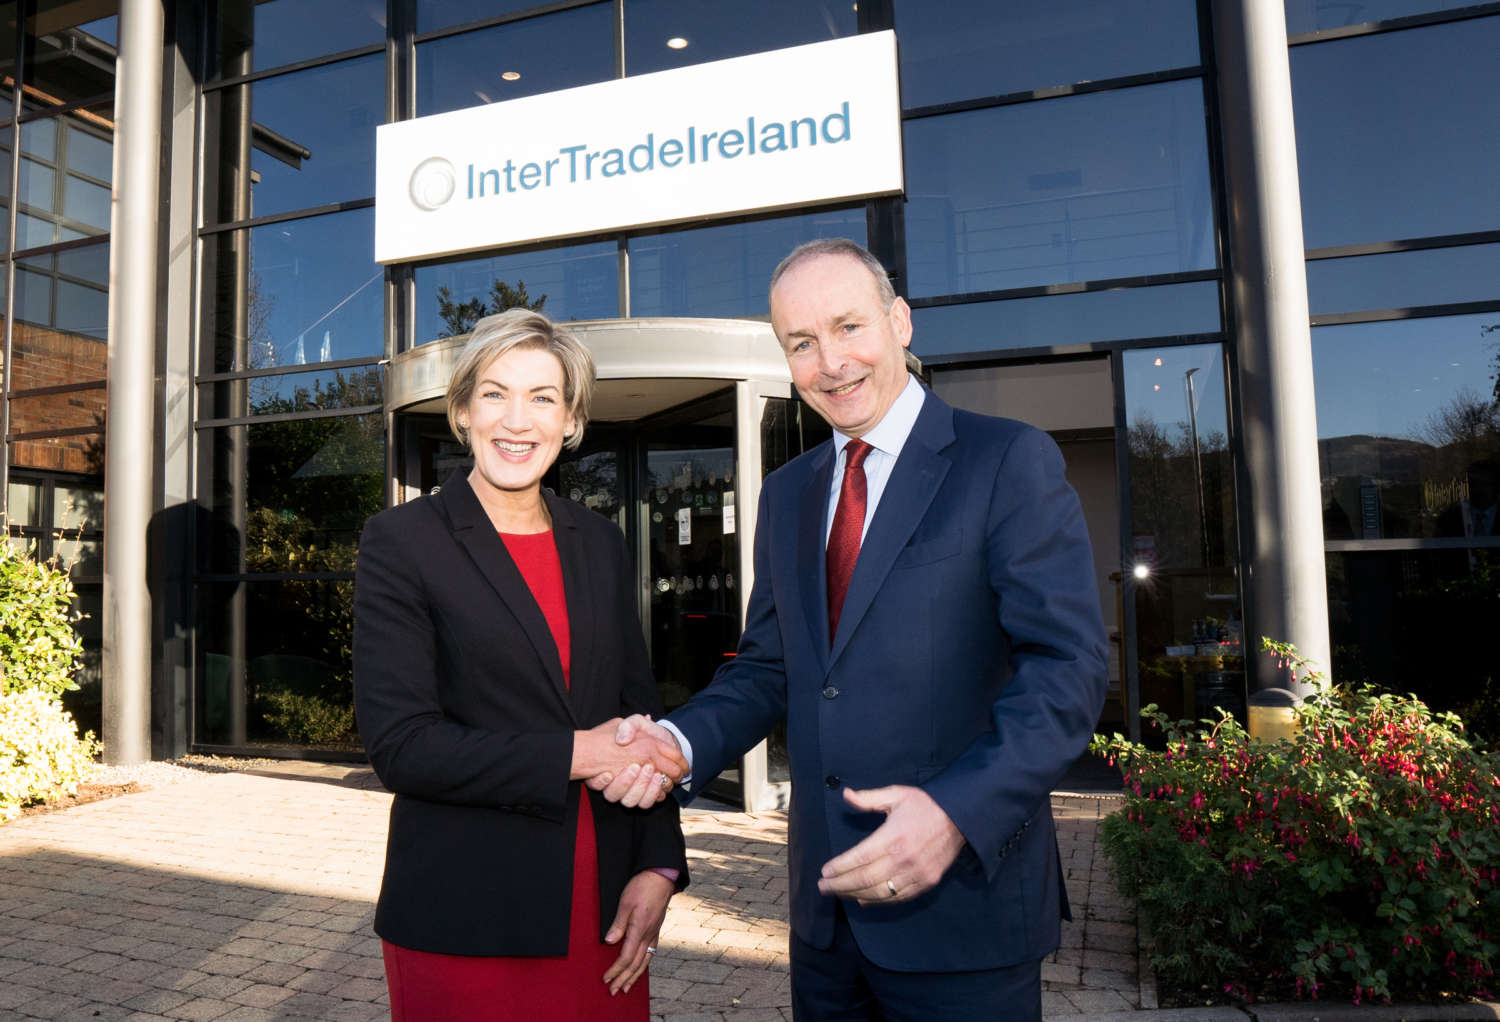 CEO Margaret Hearty shaking hands with Taoiseach Micheál Martin outside Inter Trade Ireland